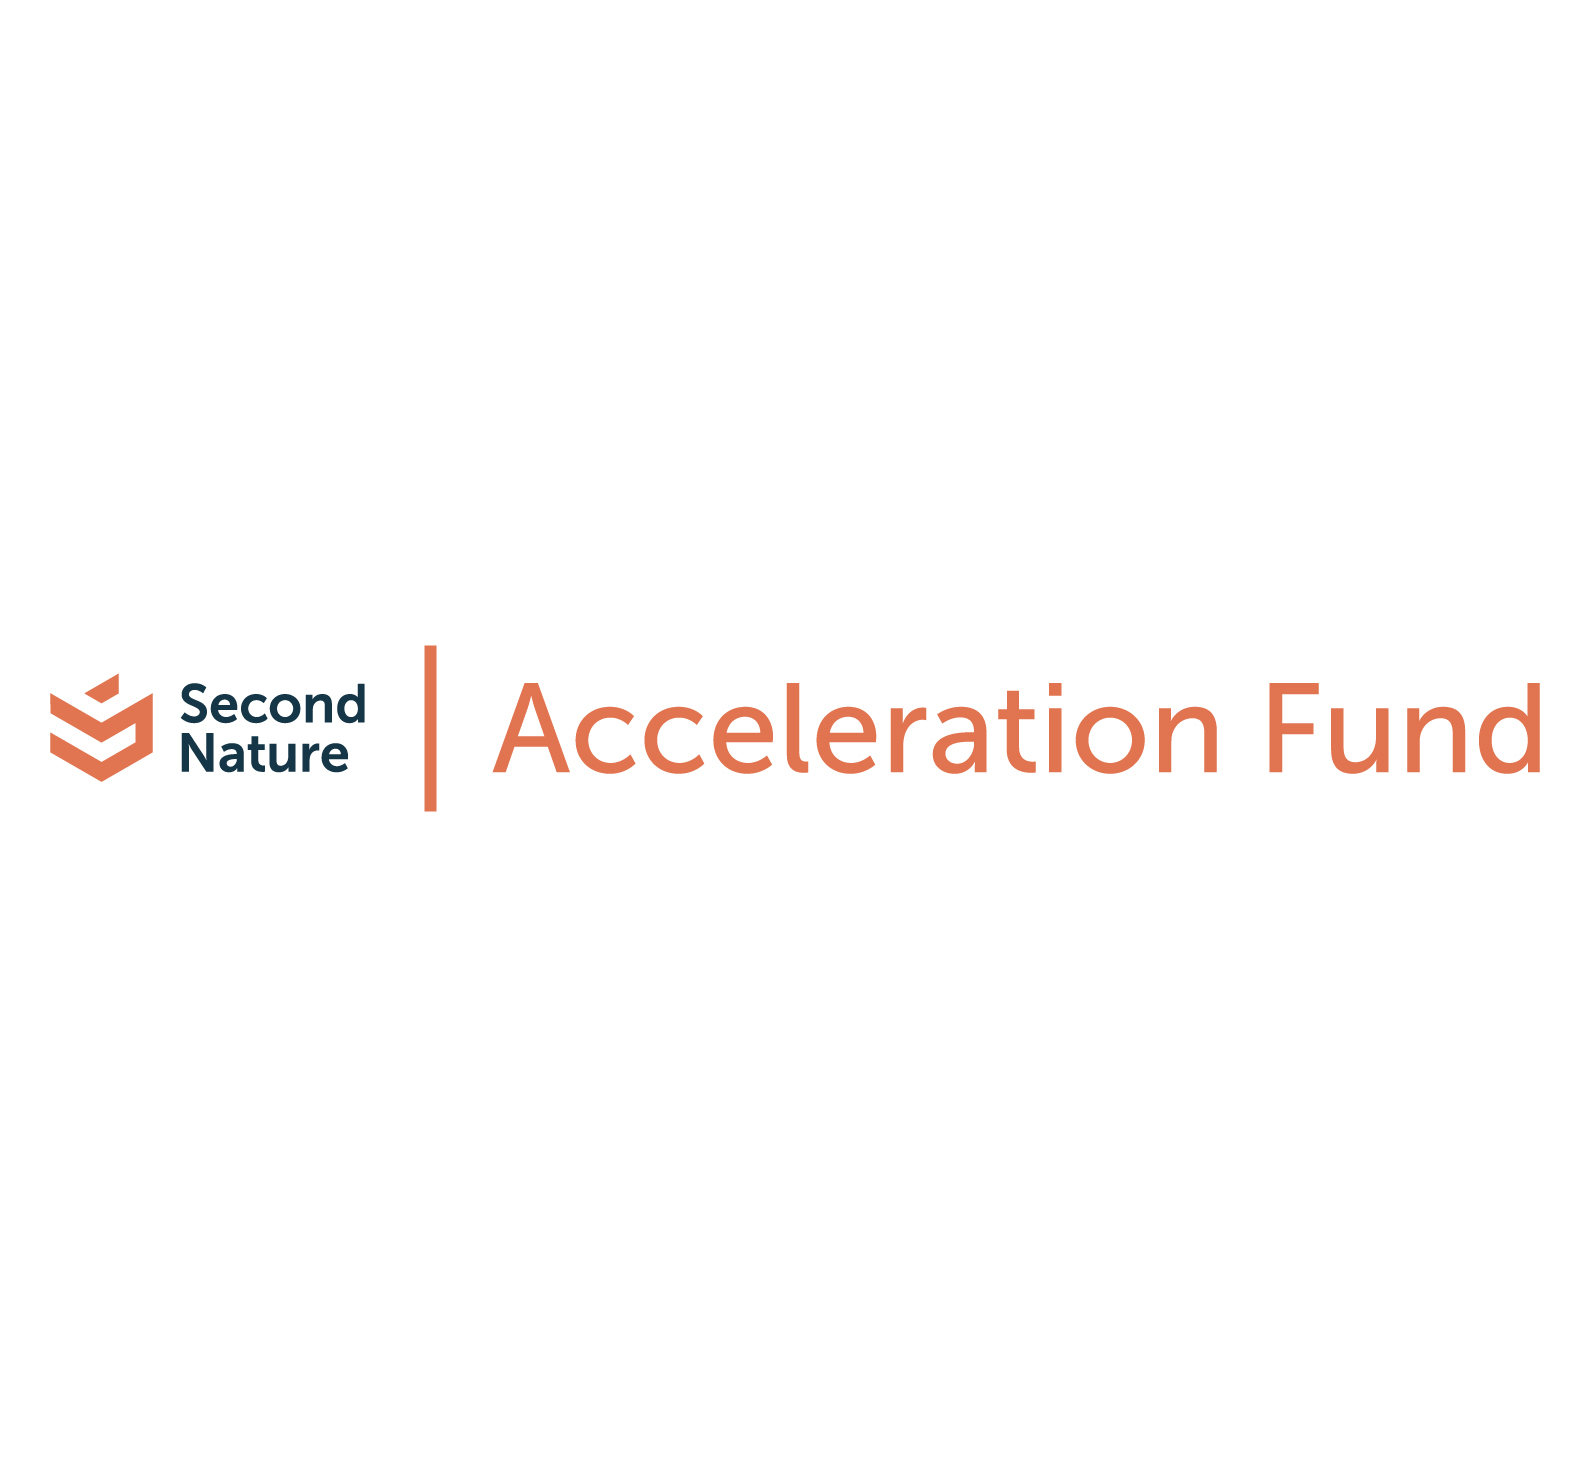 Second Nature Acceleration Fund logo 